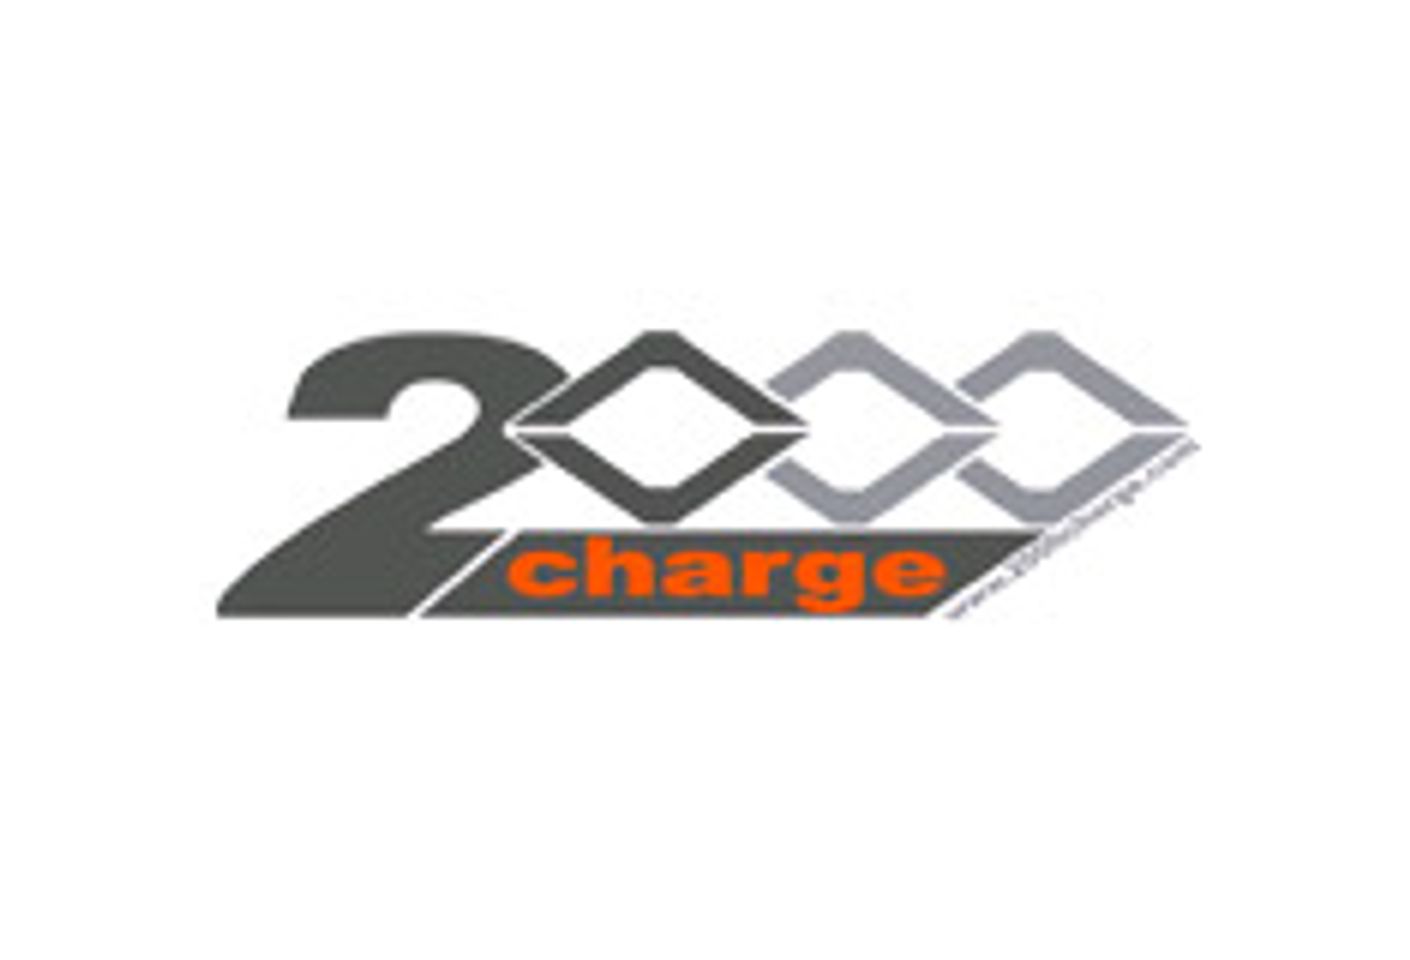 2000Charge Launches Check NSF Recovery Service